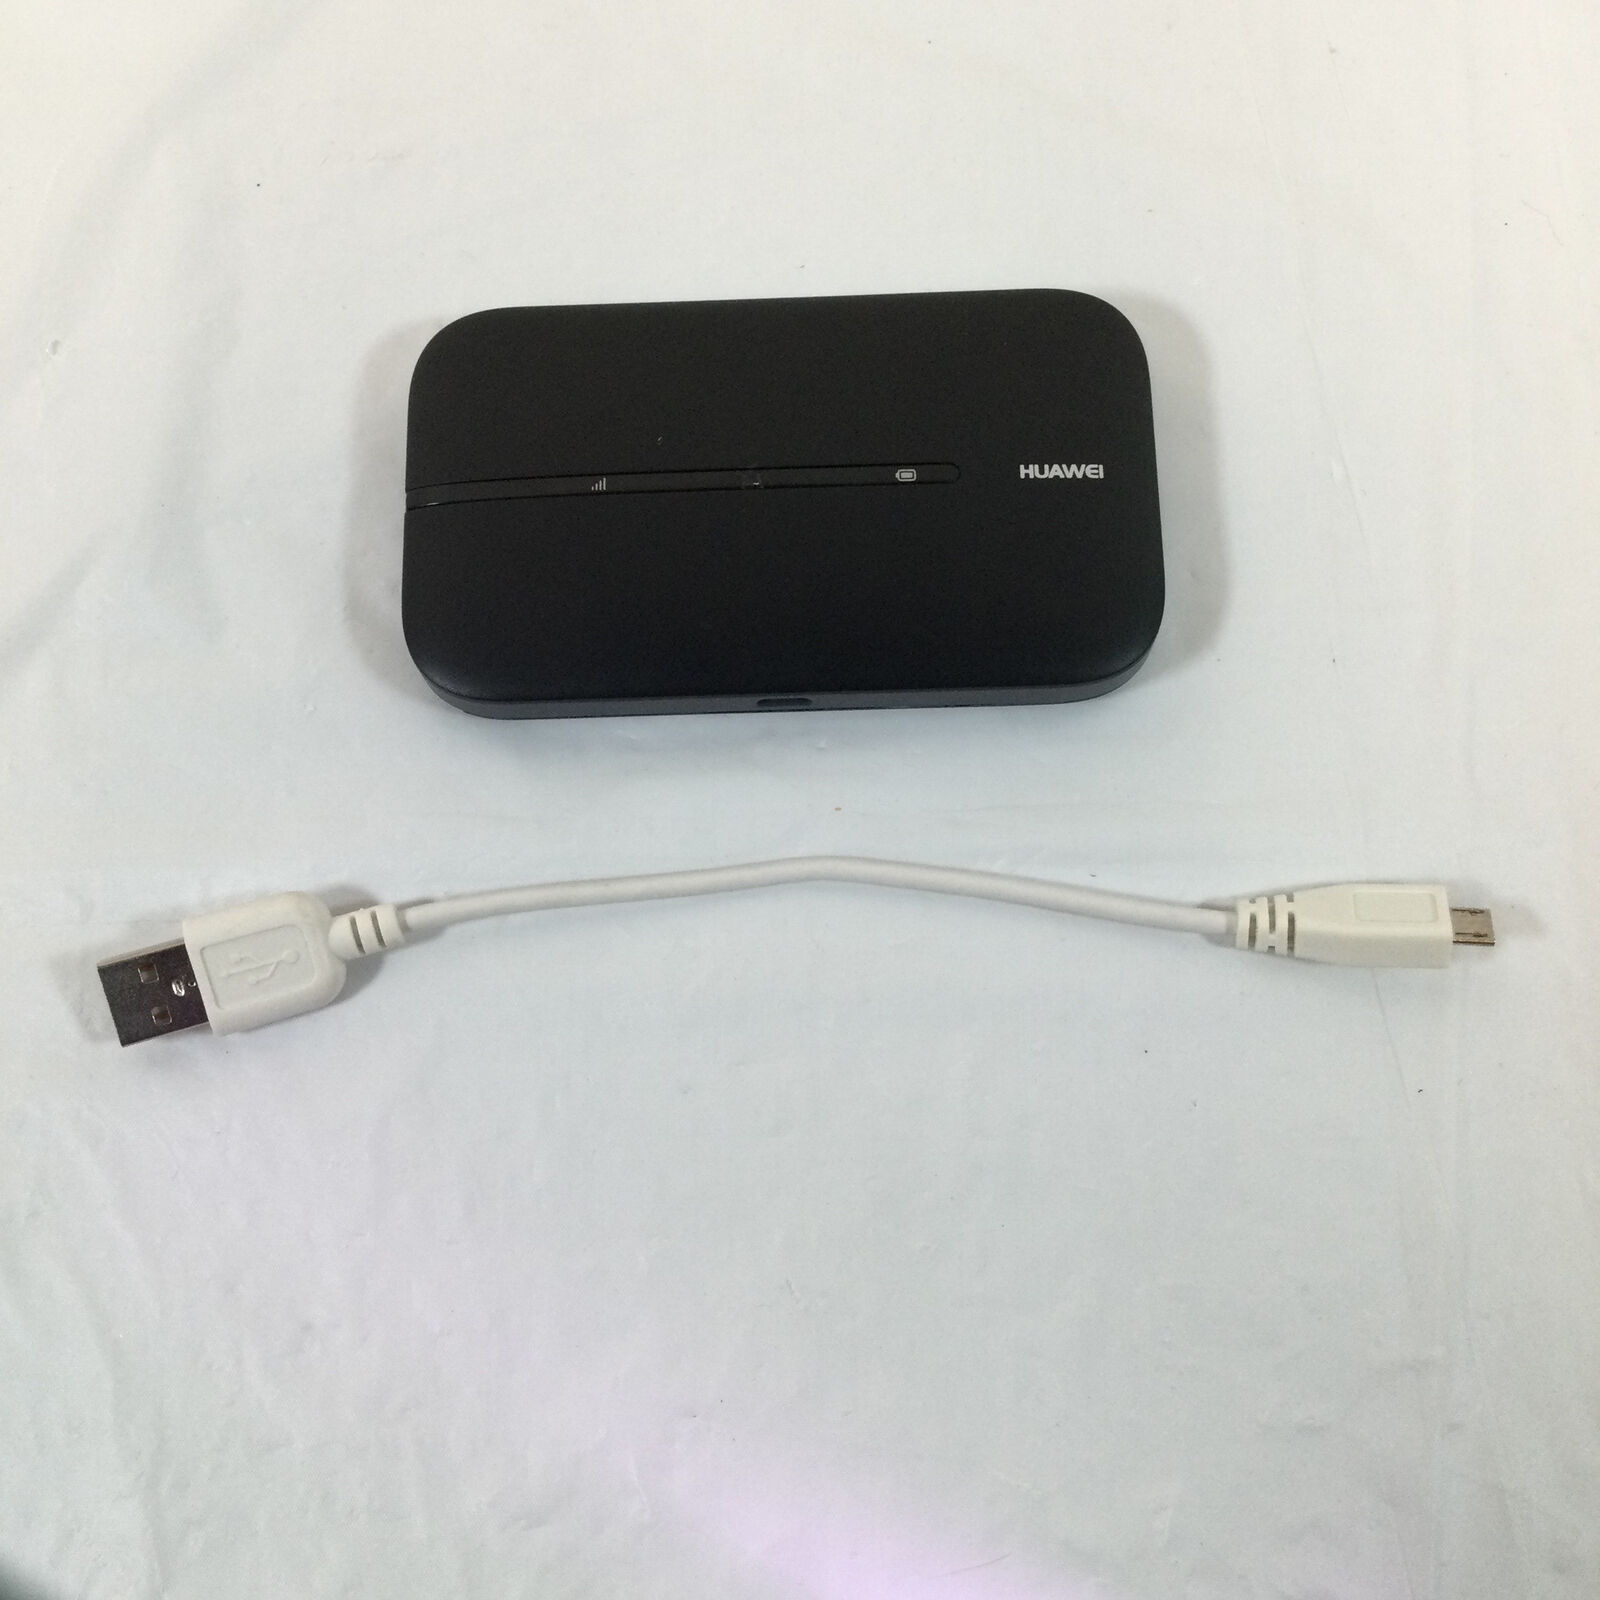 Huawei Black Lightweight Portable 4G LTE Mobile WiFi With USB Cord Used